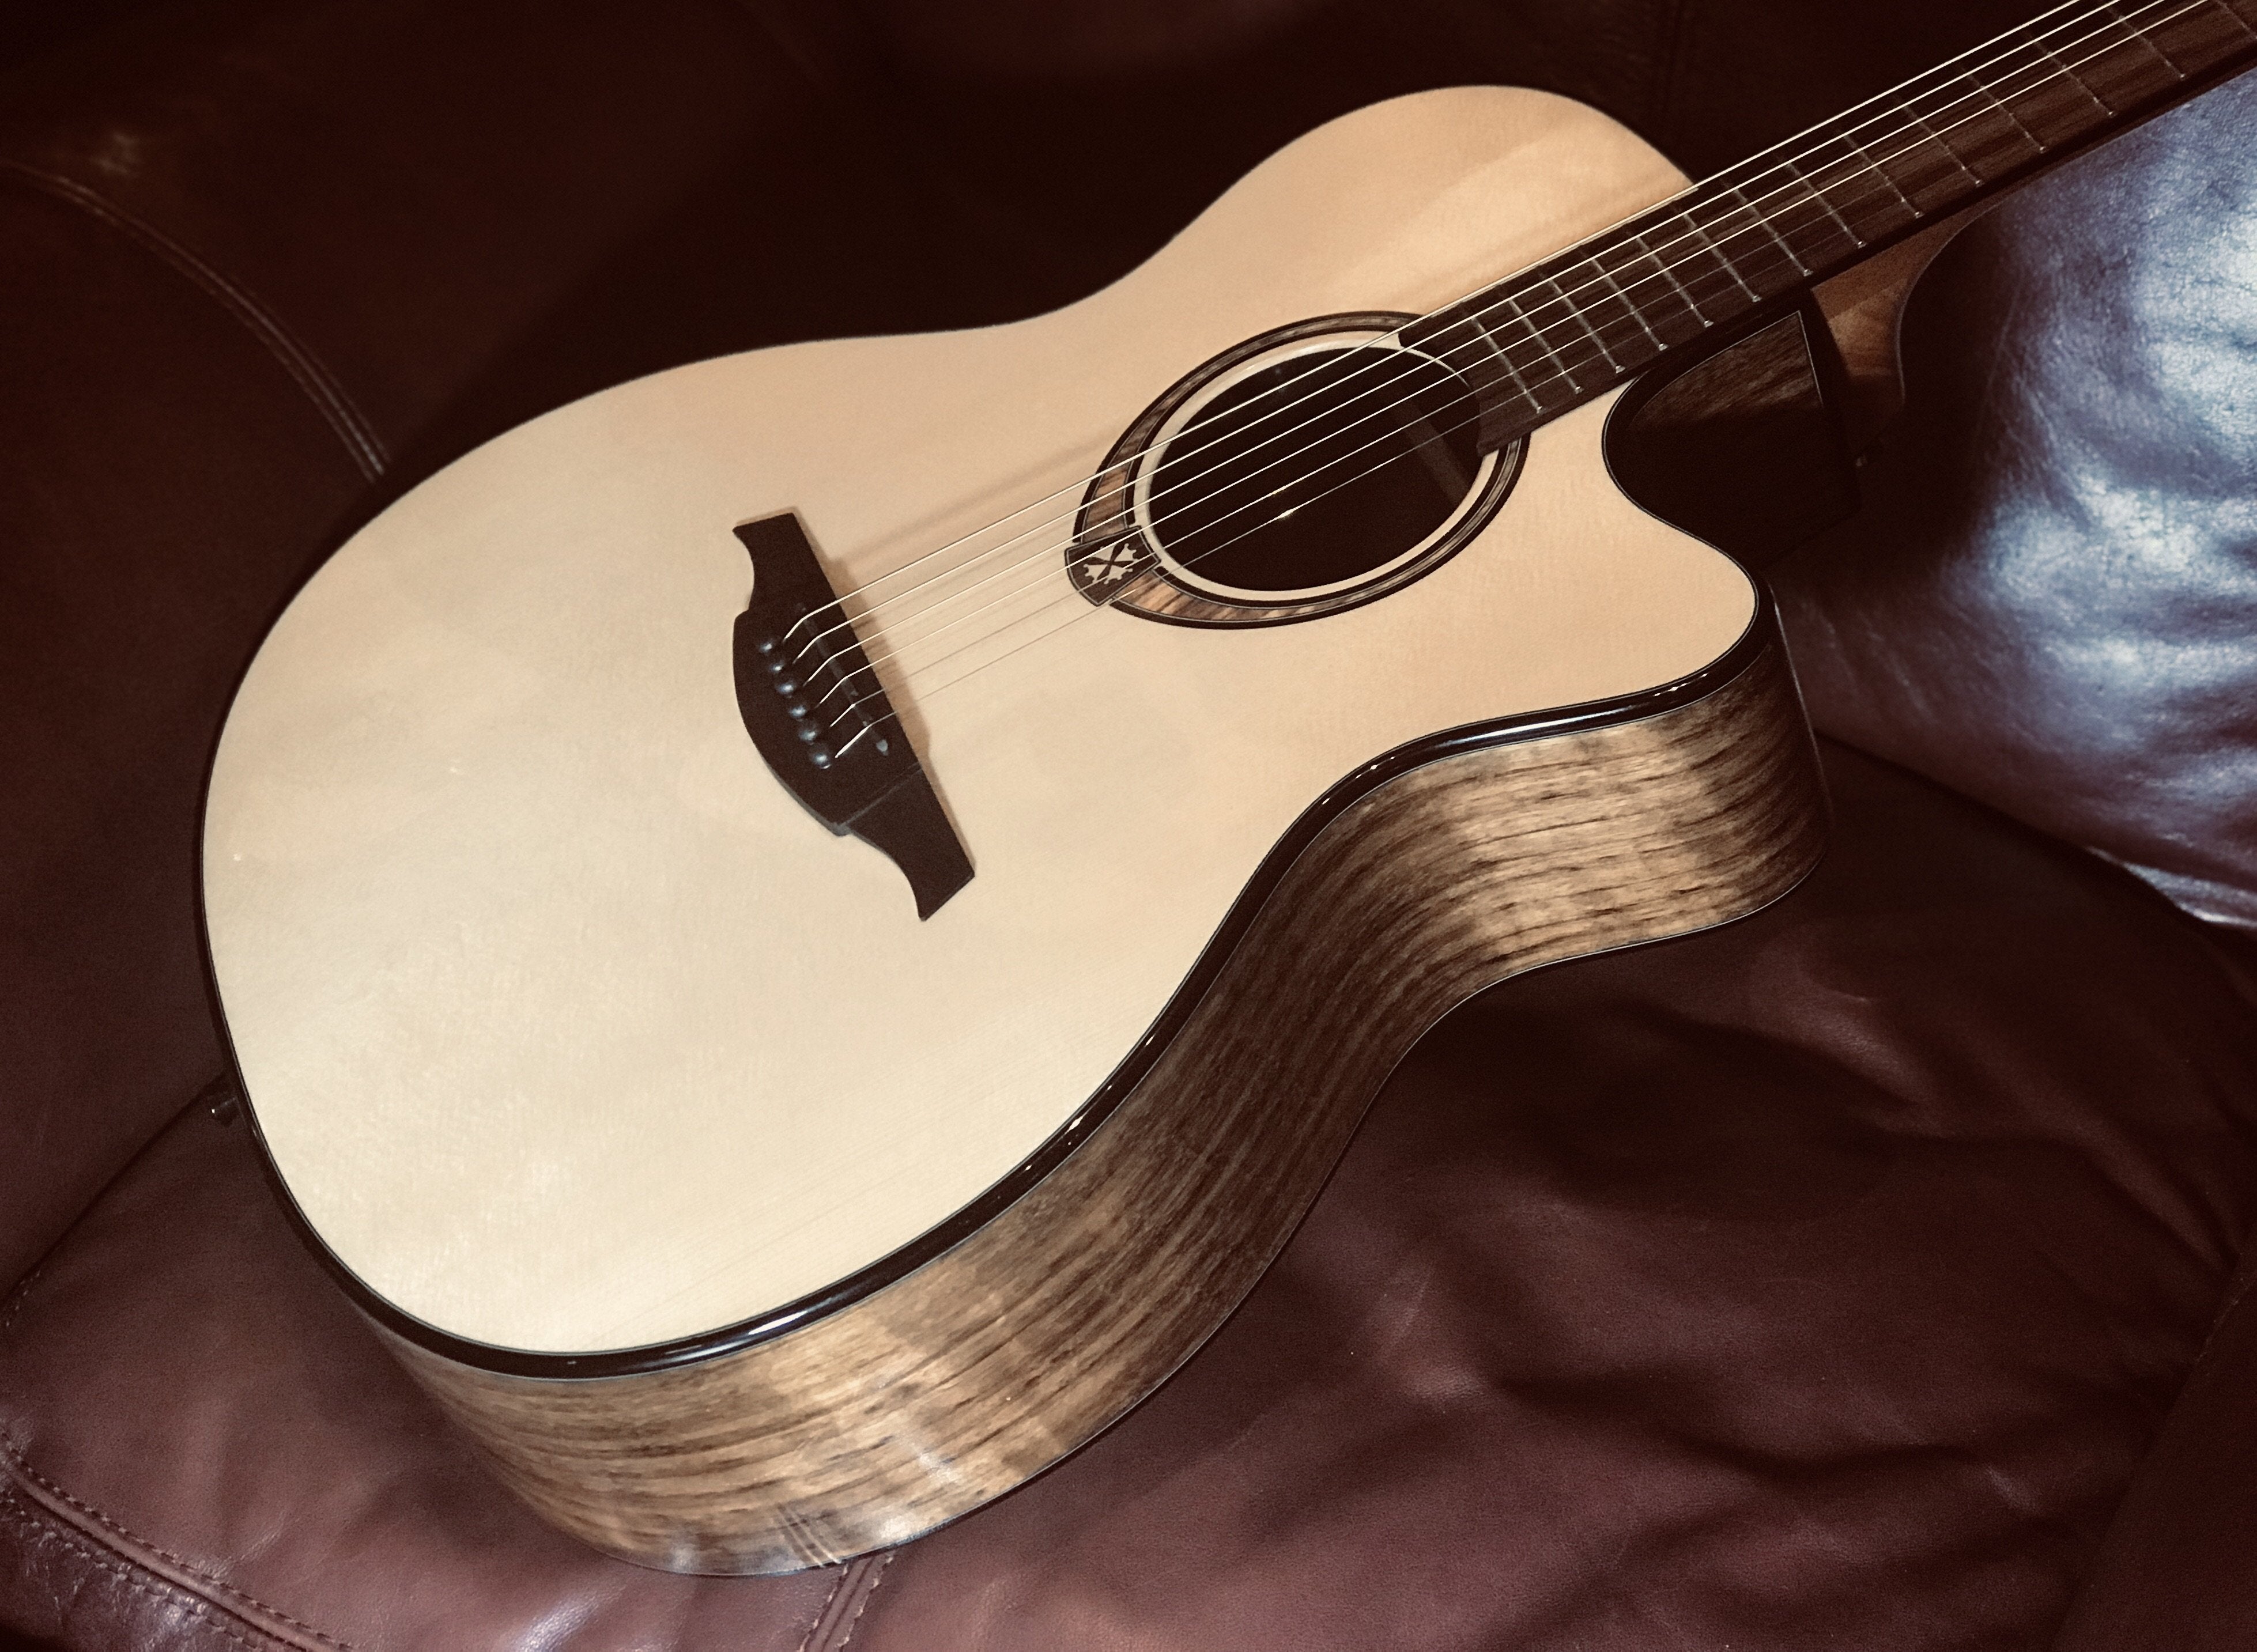 LAG TRAMONTANE 318 T318ACE AUDITORIUM CUTAWAY ELECTRO, Electro Acoustic Guitar for sale at Richards Guitars.